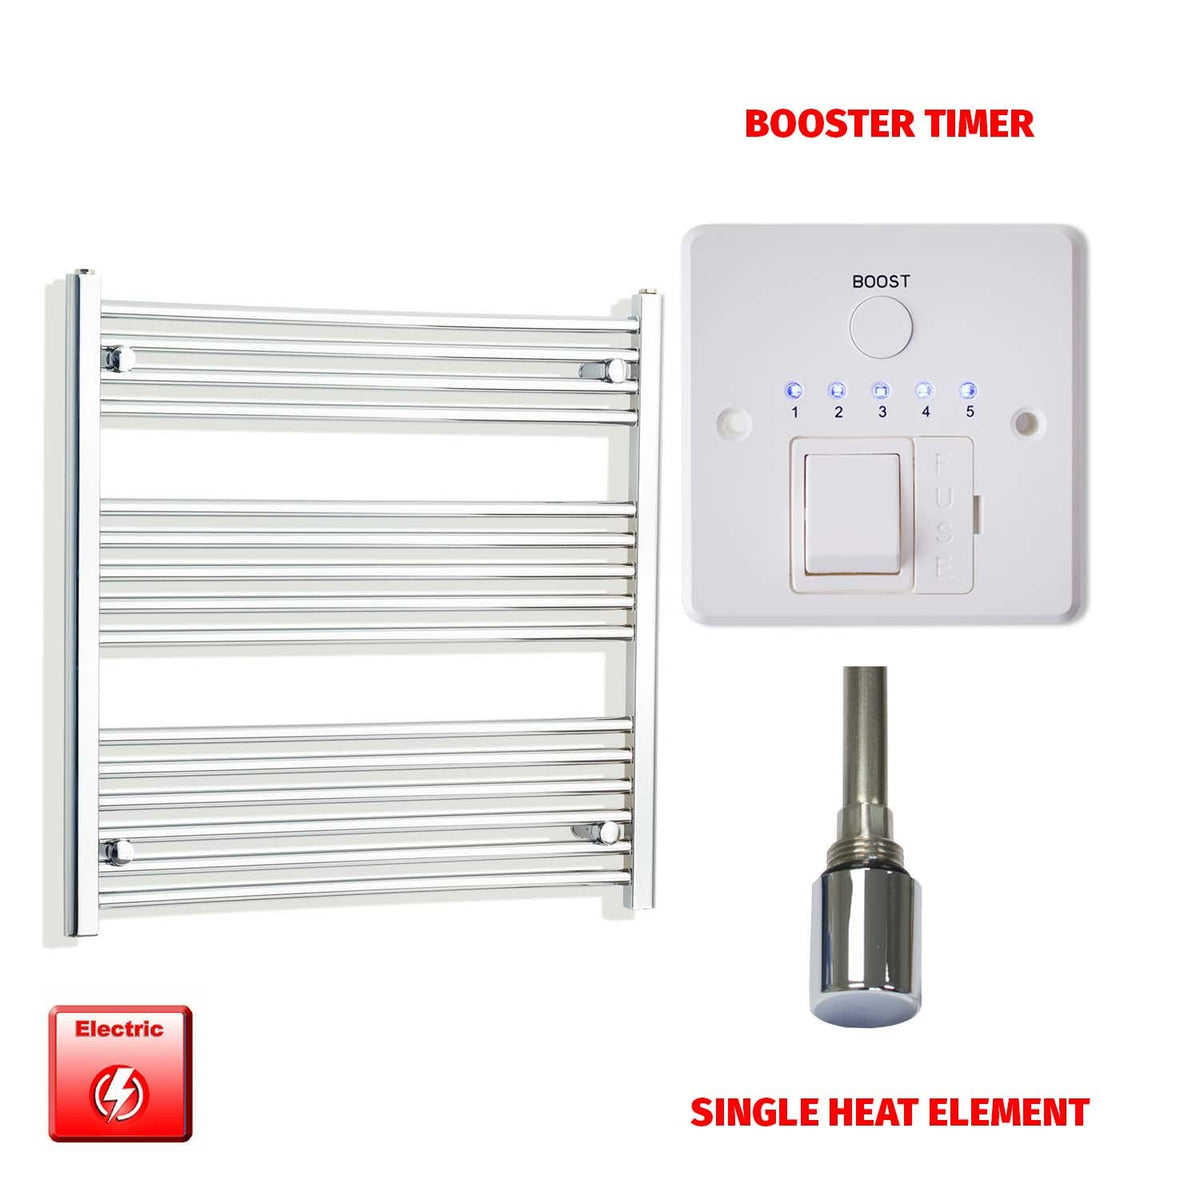 800mm High 900mm Wide Pre-Filled Electric Heated Towel Radiator Straight Chrome Single heat element Booster timer